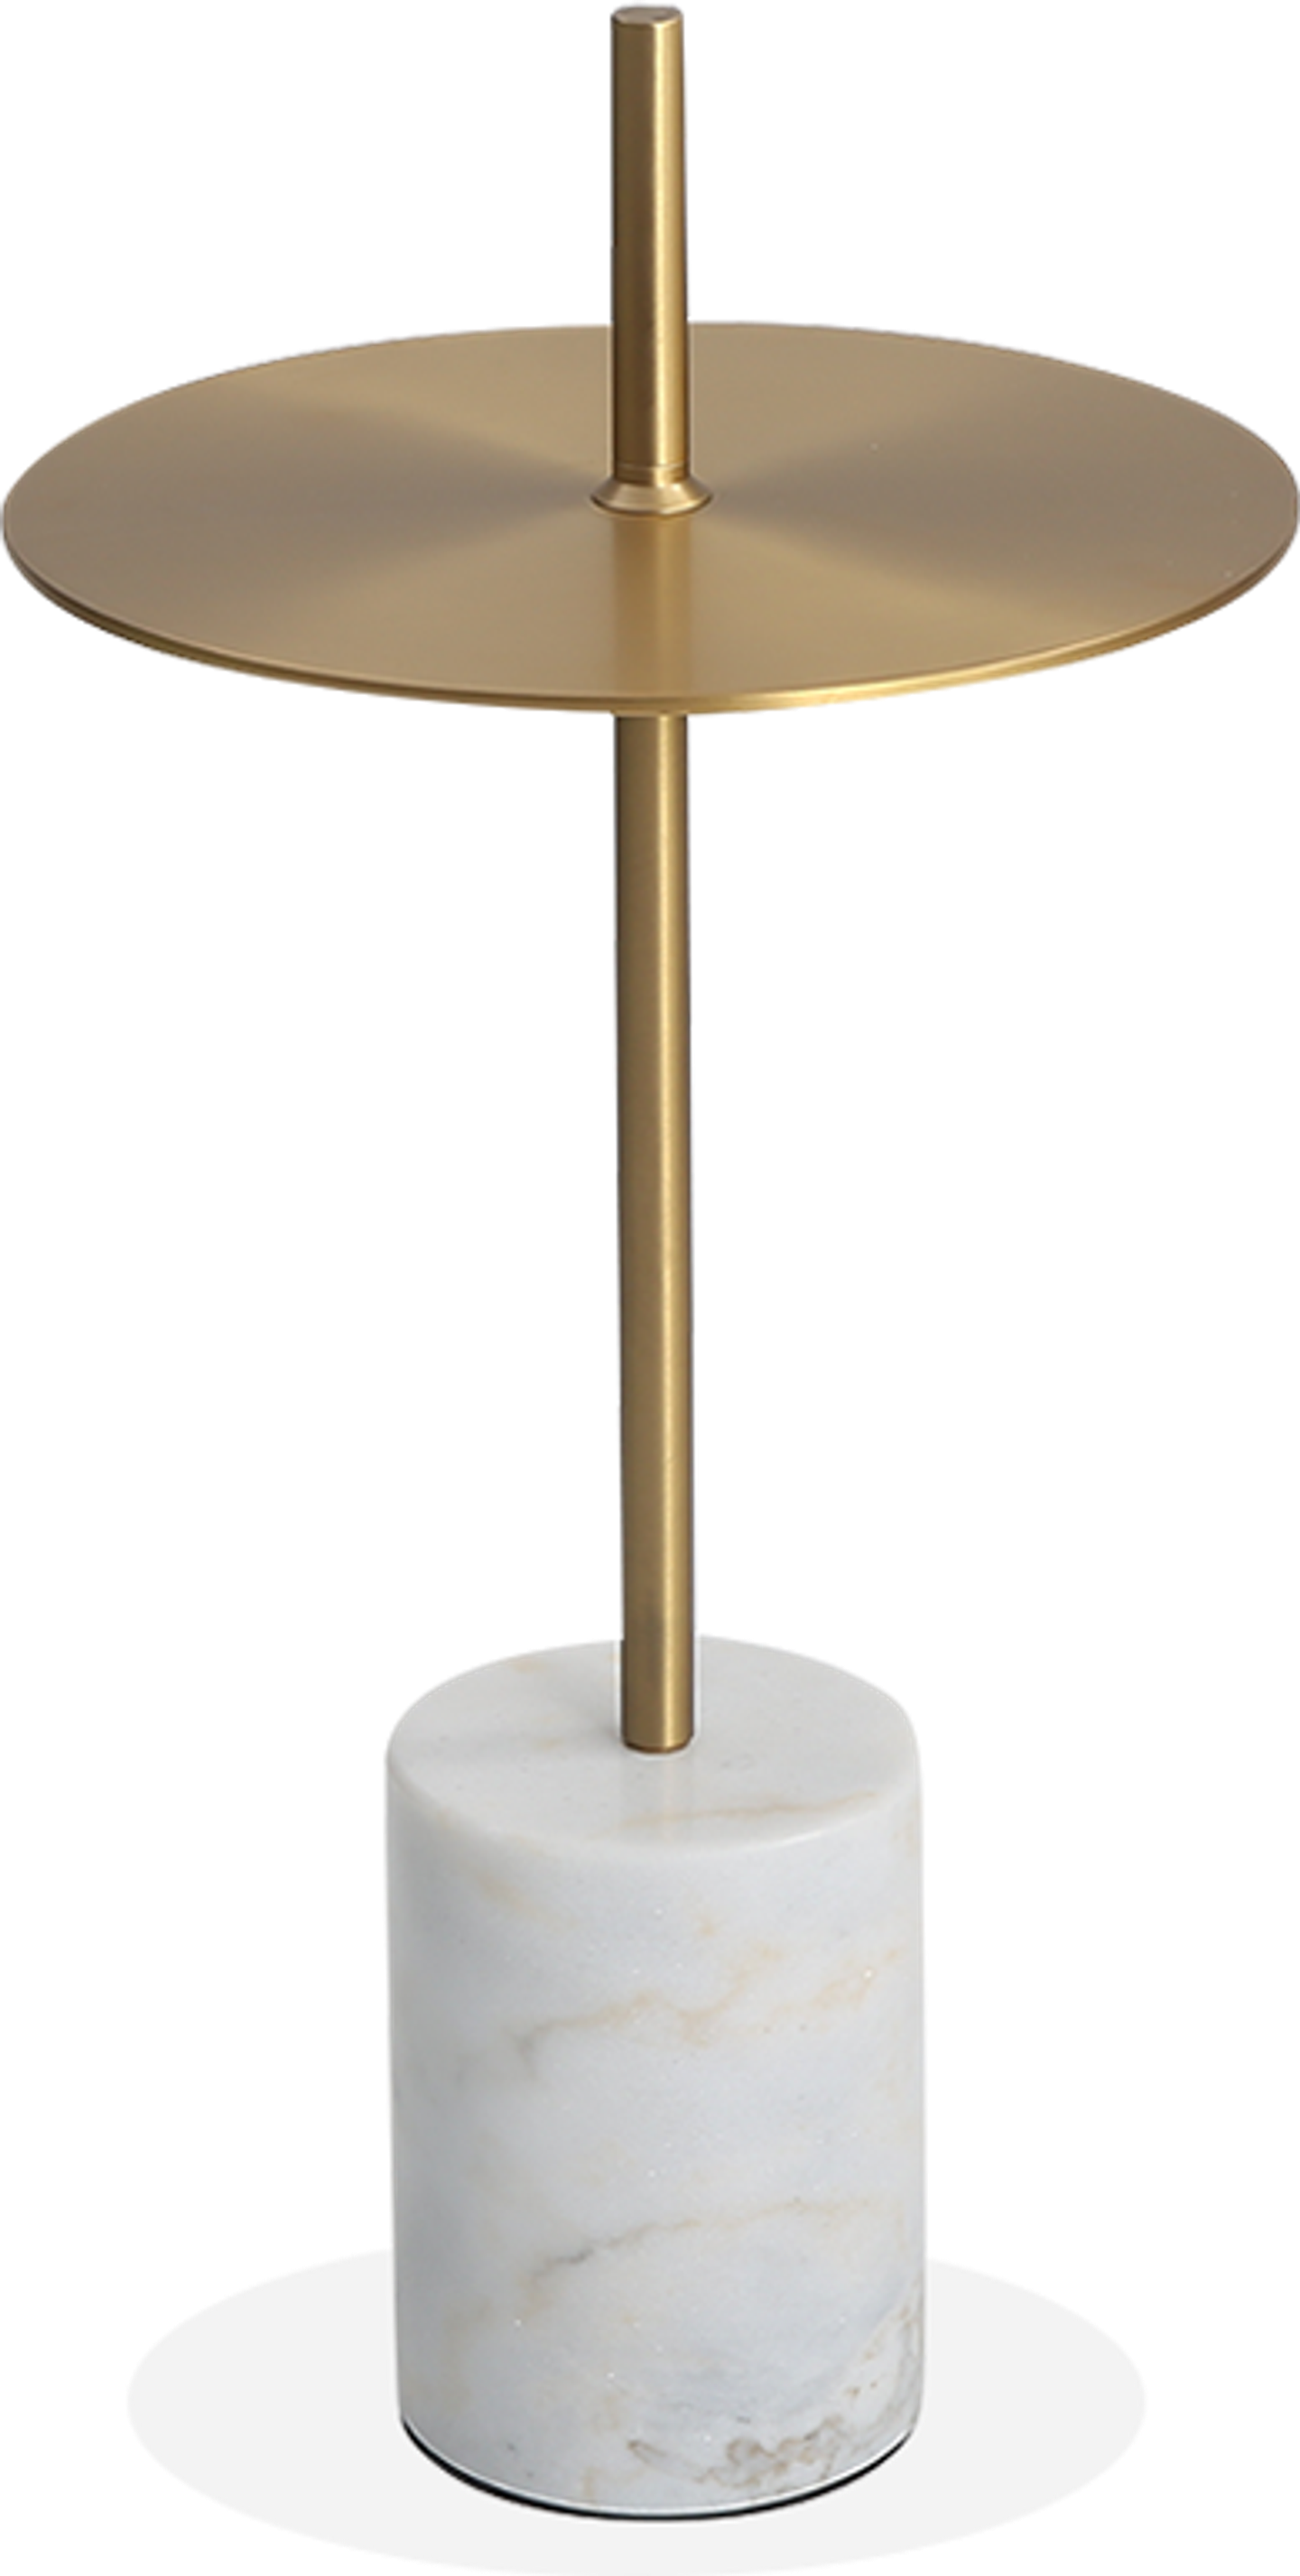 Calibre Salontafel Klein - Messing - Wit Marmer White Marble/Brushed Brass image.